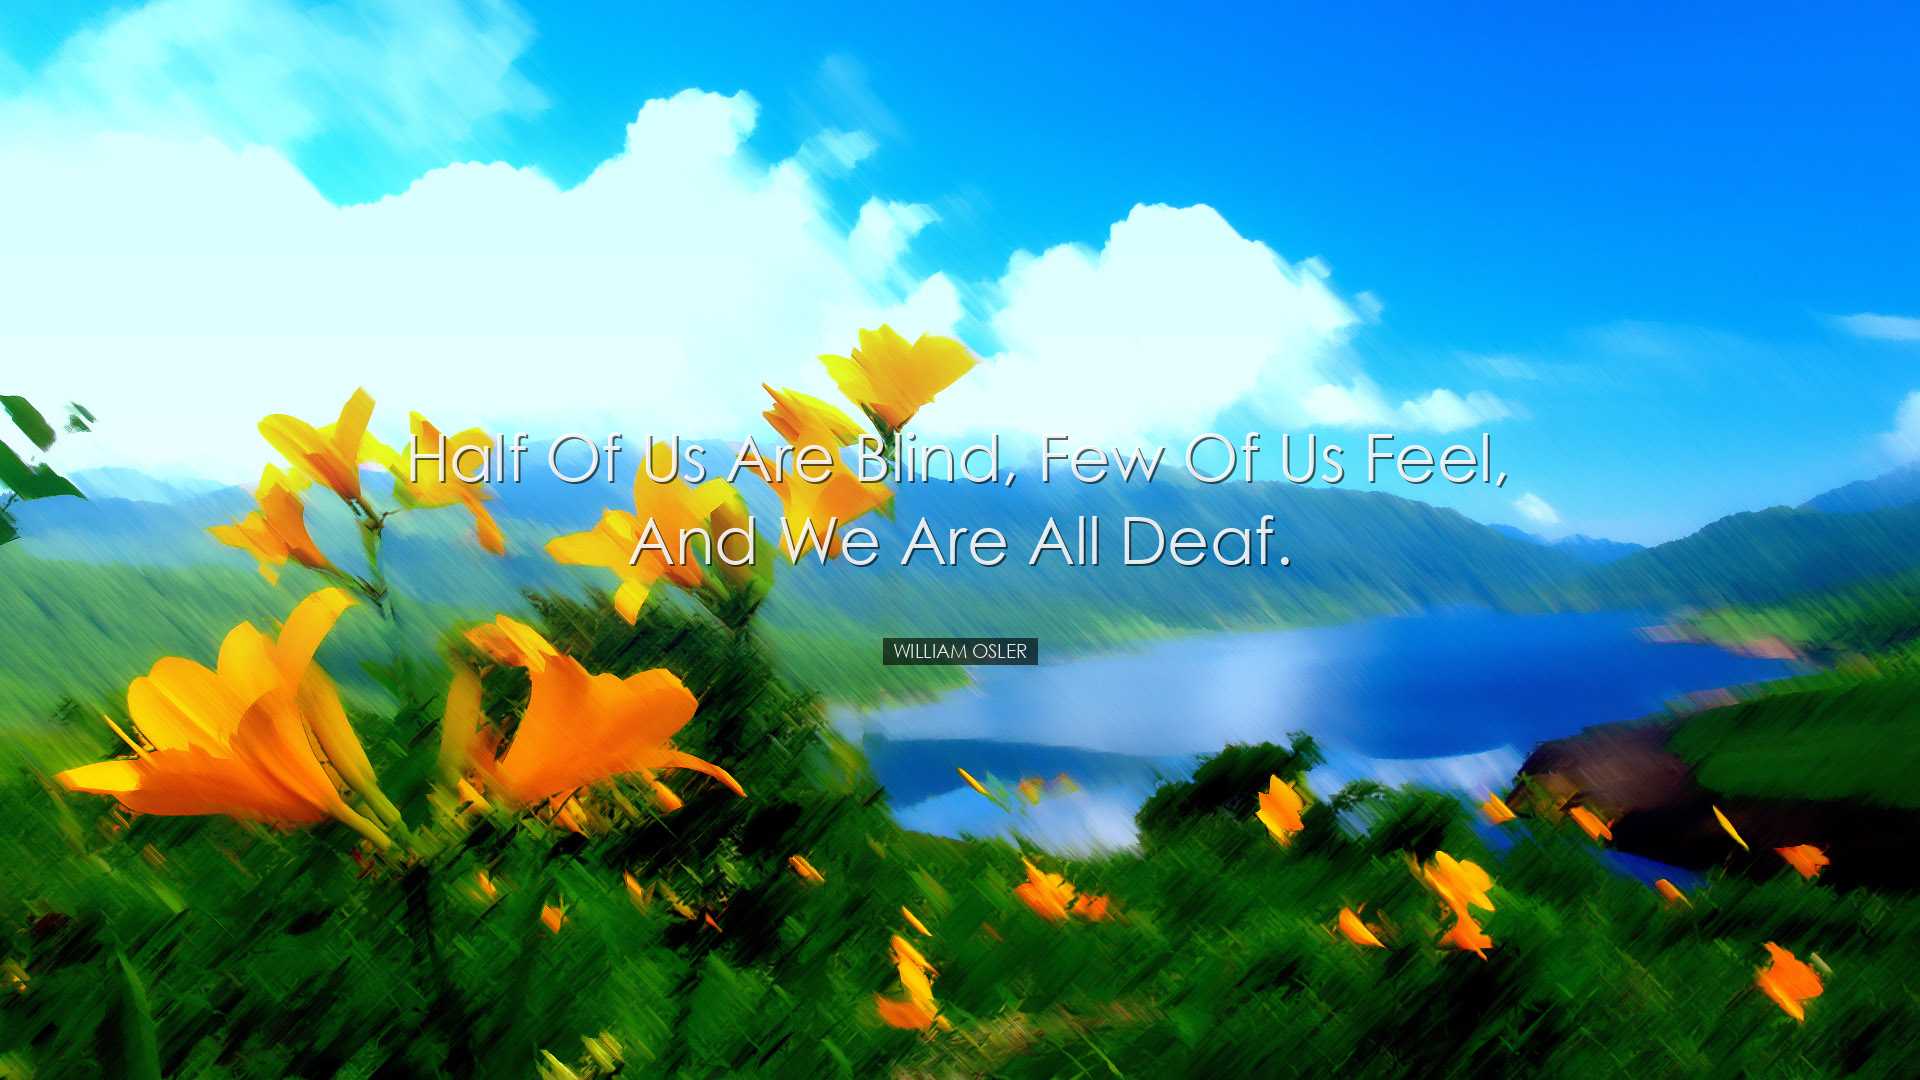 Half of us are blind, few of us feel, and we are all deaf. - Willi